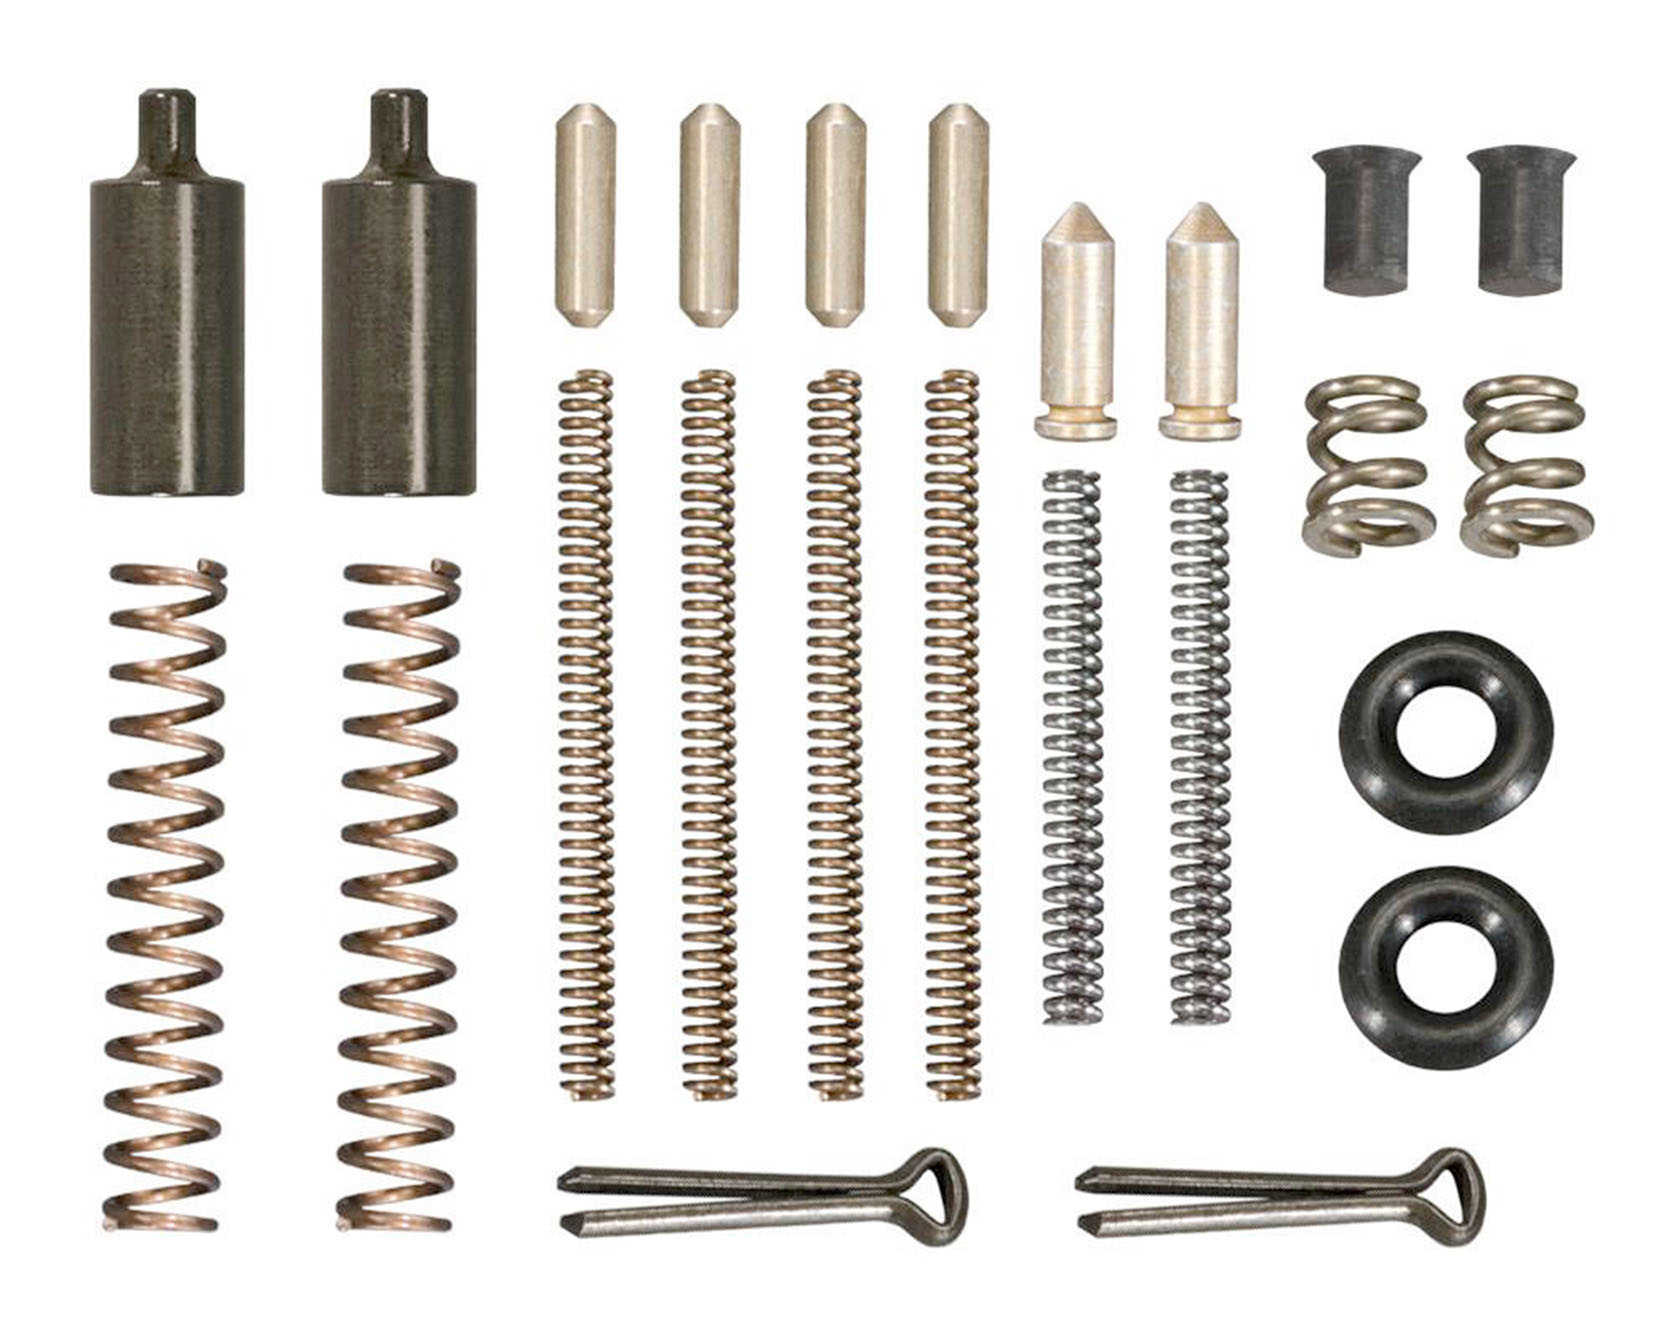 Windham Weaponry PKMWK Most Wanted Parts Kit AR15 and M16 Clamshell Package